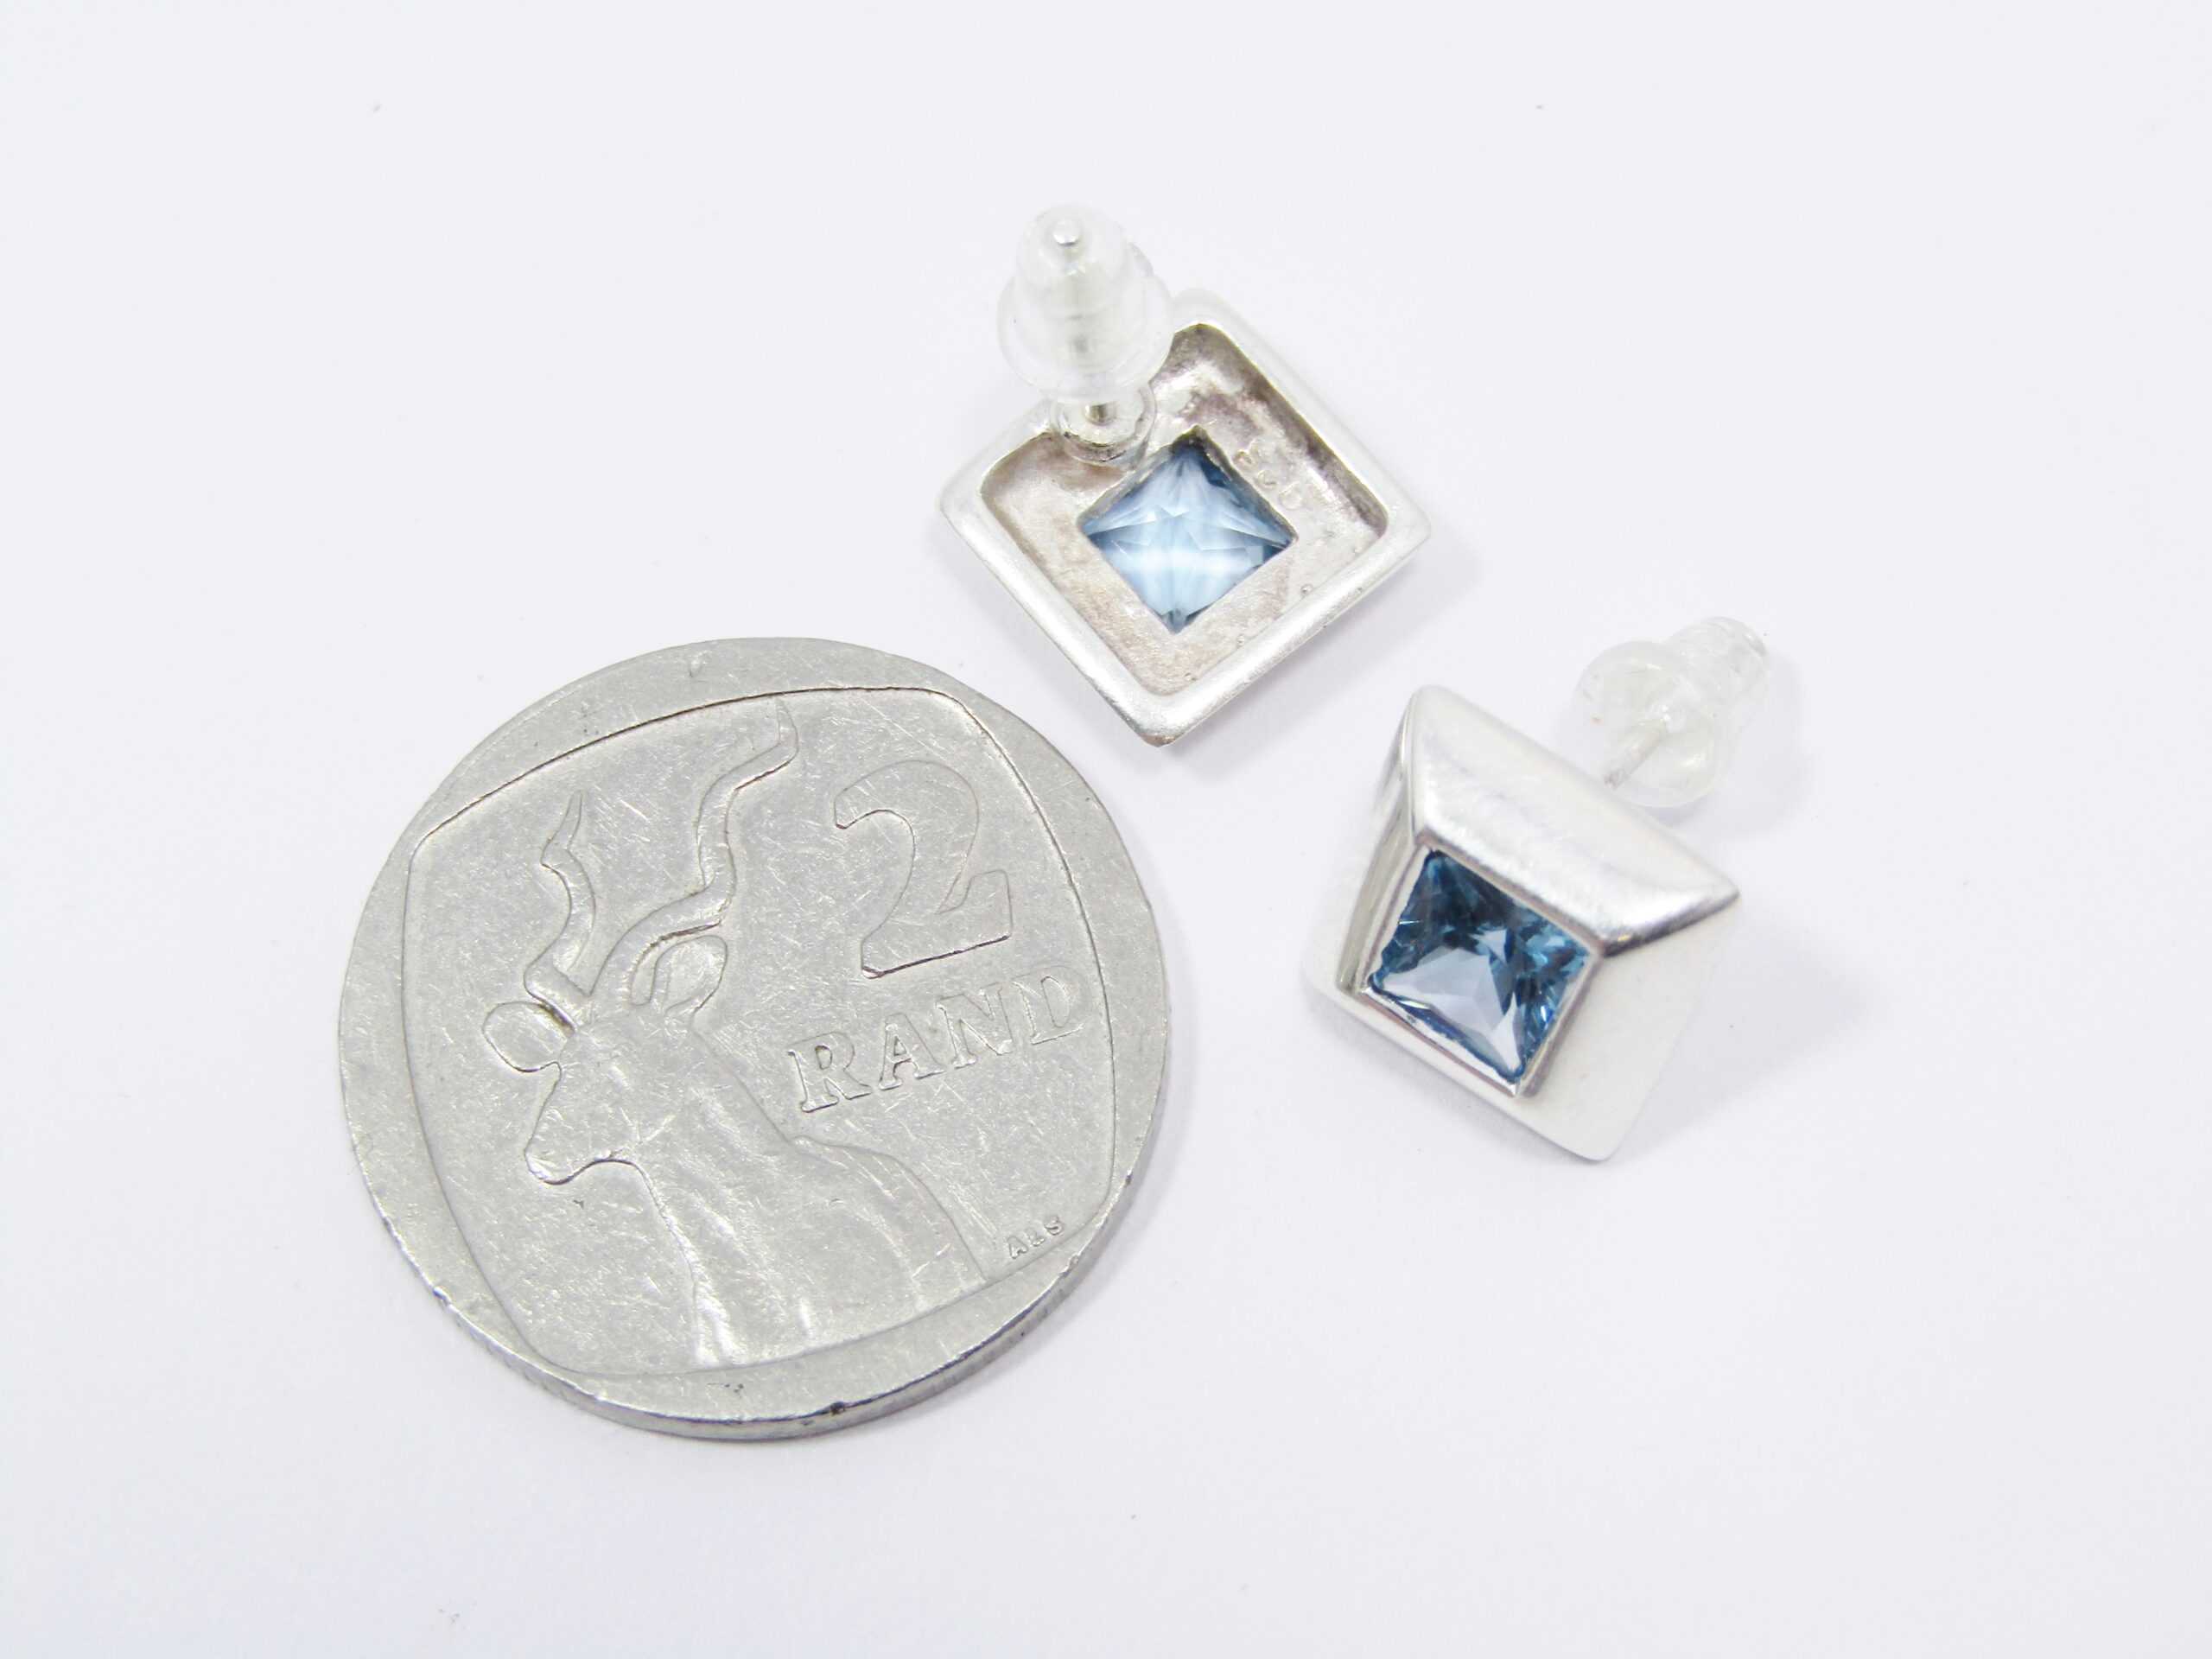 A Gorgeous Pair of Square Blue Zirconia Earrings in Sterling Silver